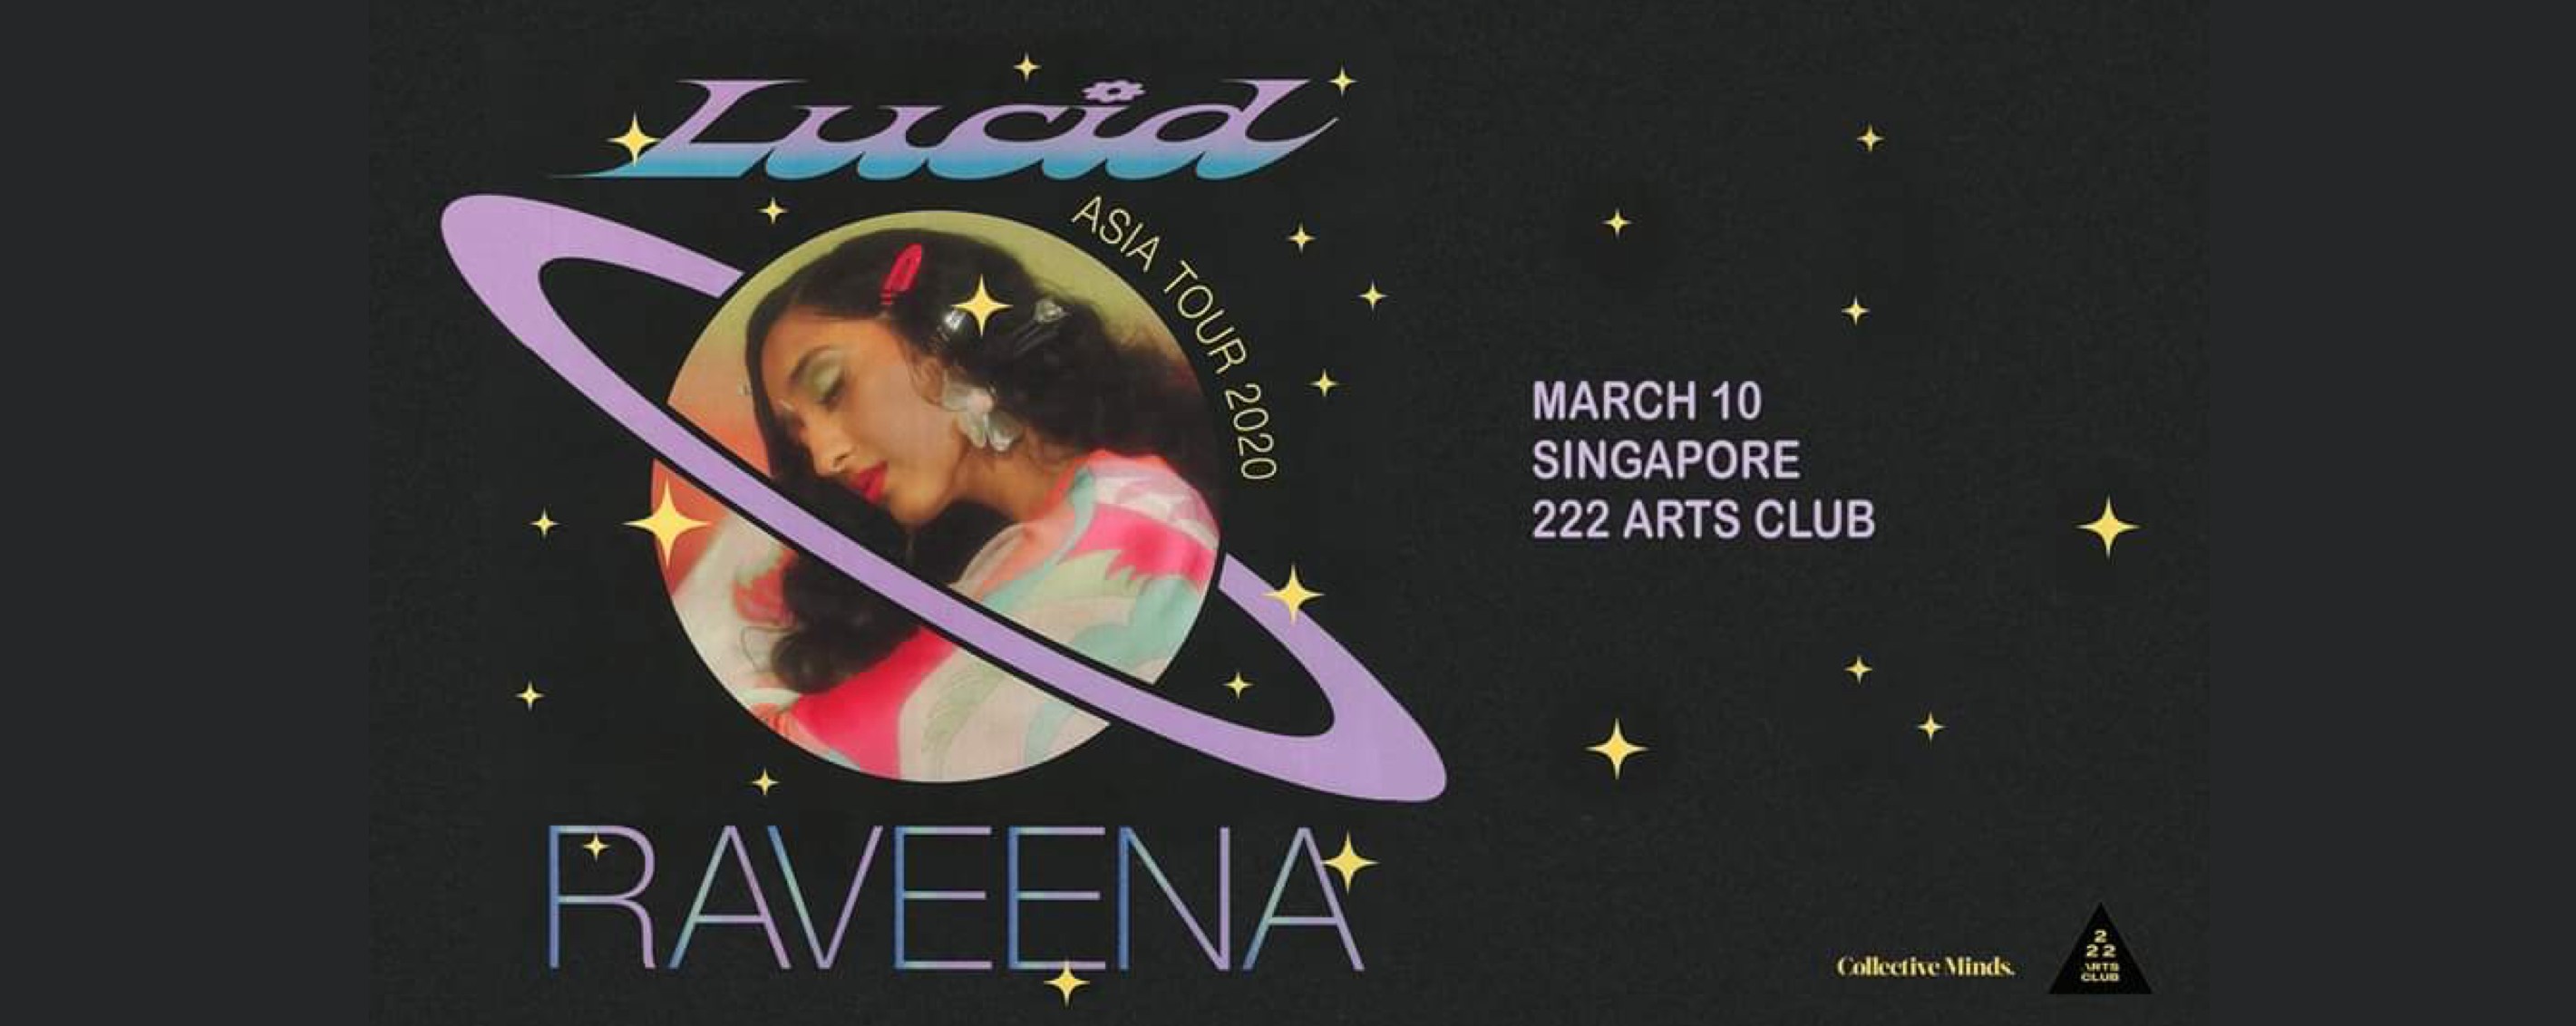 [POSTPONED] Raveena (US) presented by Collective Minds - SG Show